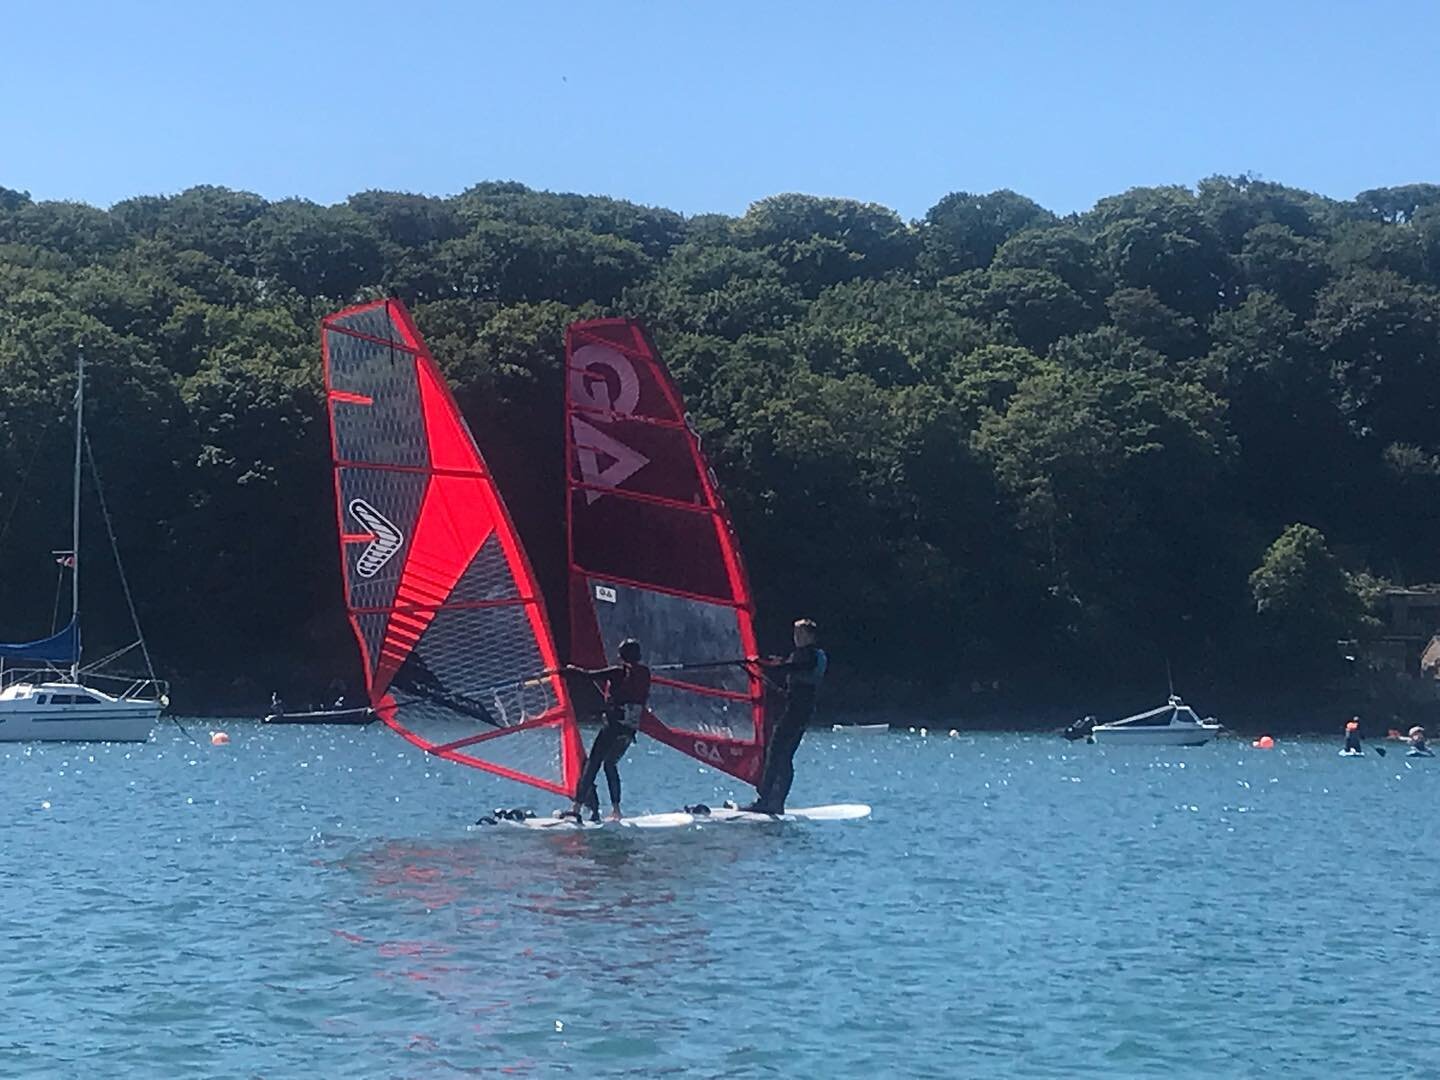 Awesome session with the Windswept Warrior&rsquo;s this morning 🤙
Perfect conditions to push up the sail sizes&hellip;.go big or go home 💪🔥

#windsweptwarrior #windsurfclub #kidswindsurf #gobigorgohome #sharethestoke #windsurfwales